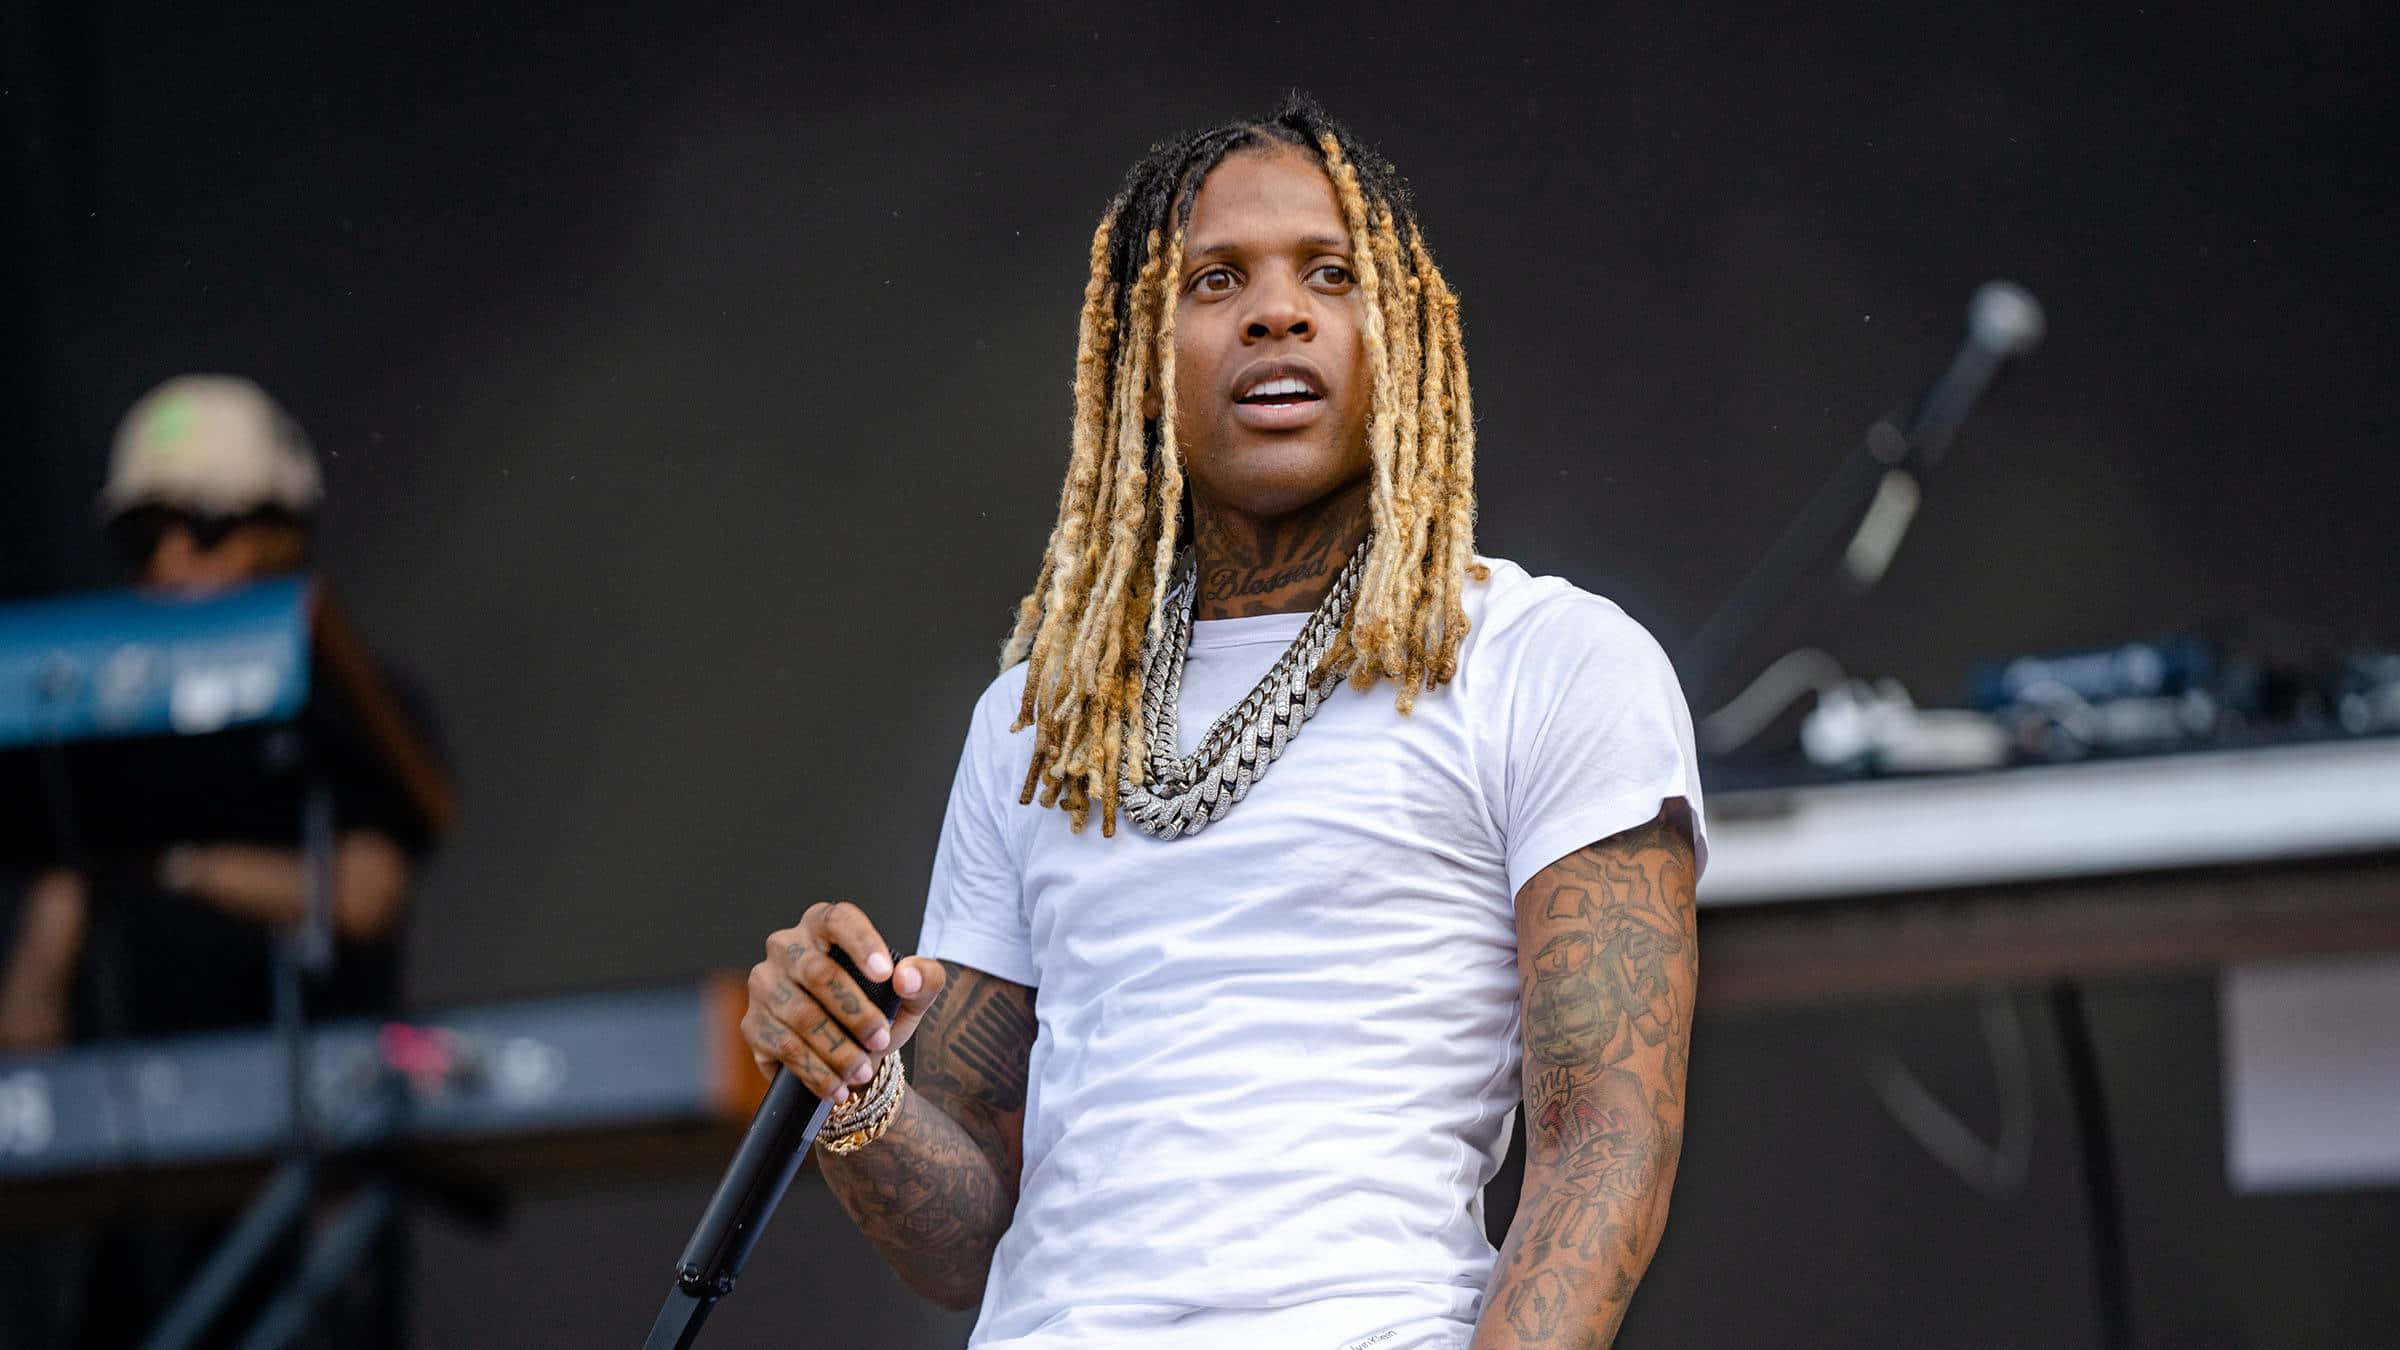 "Lil Durk: An Icon Of Music"